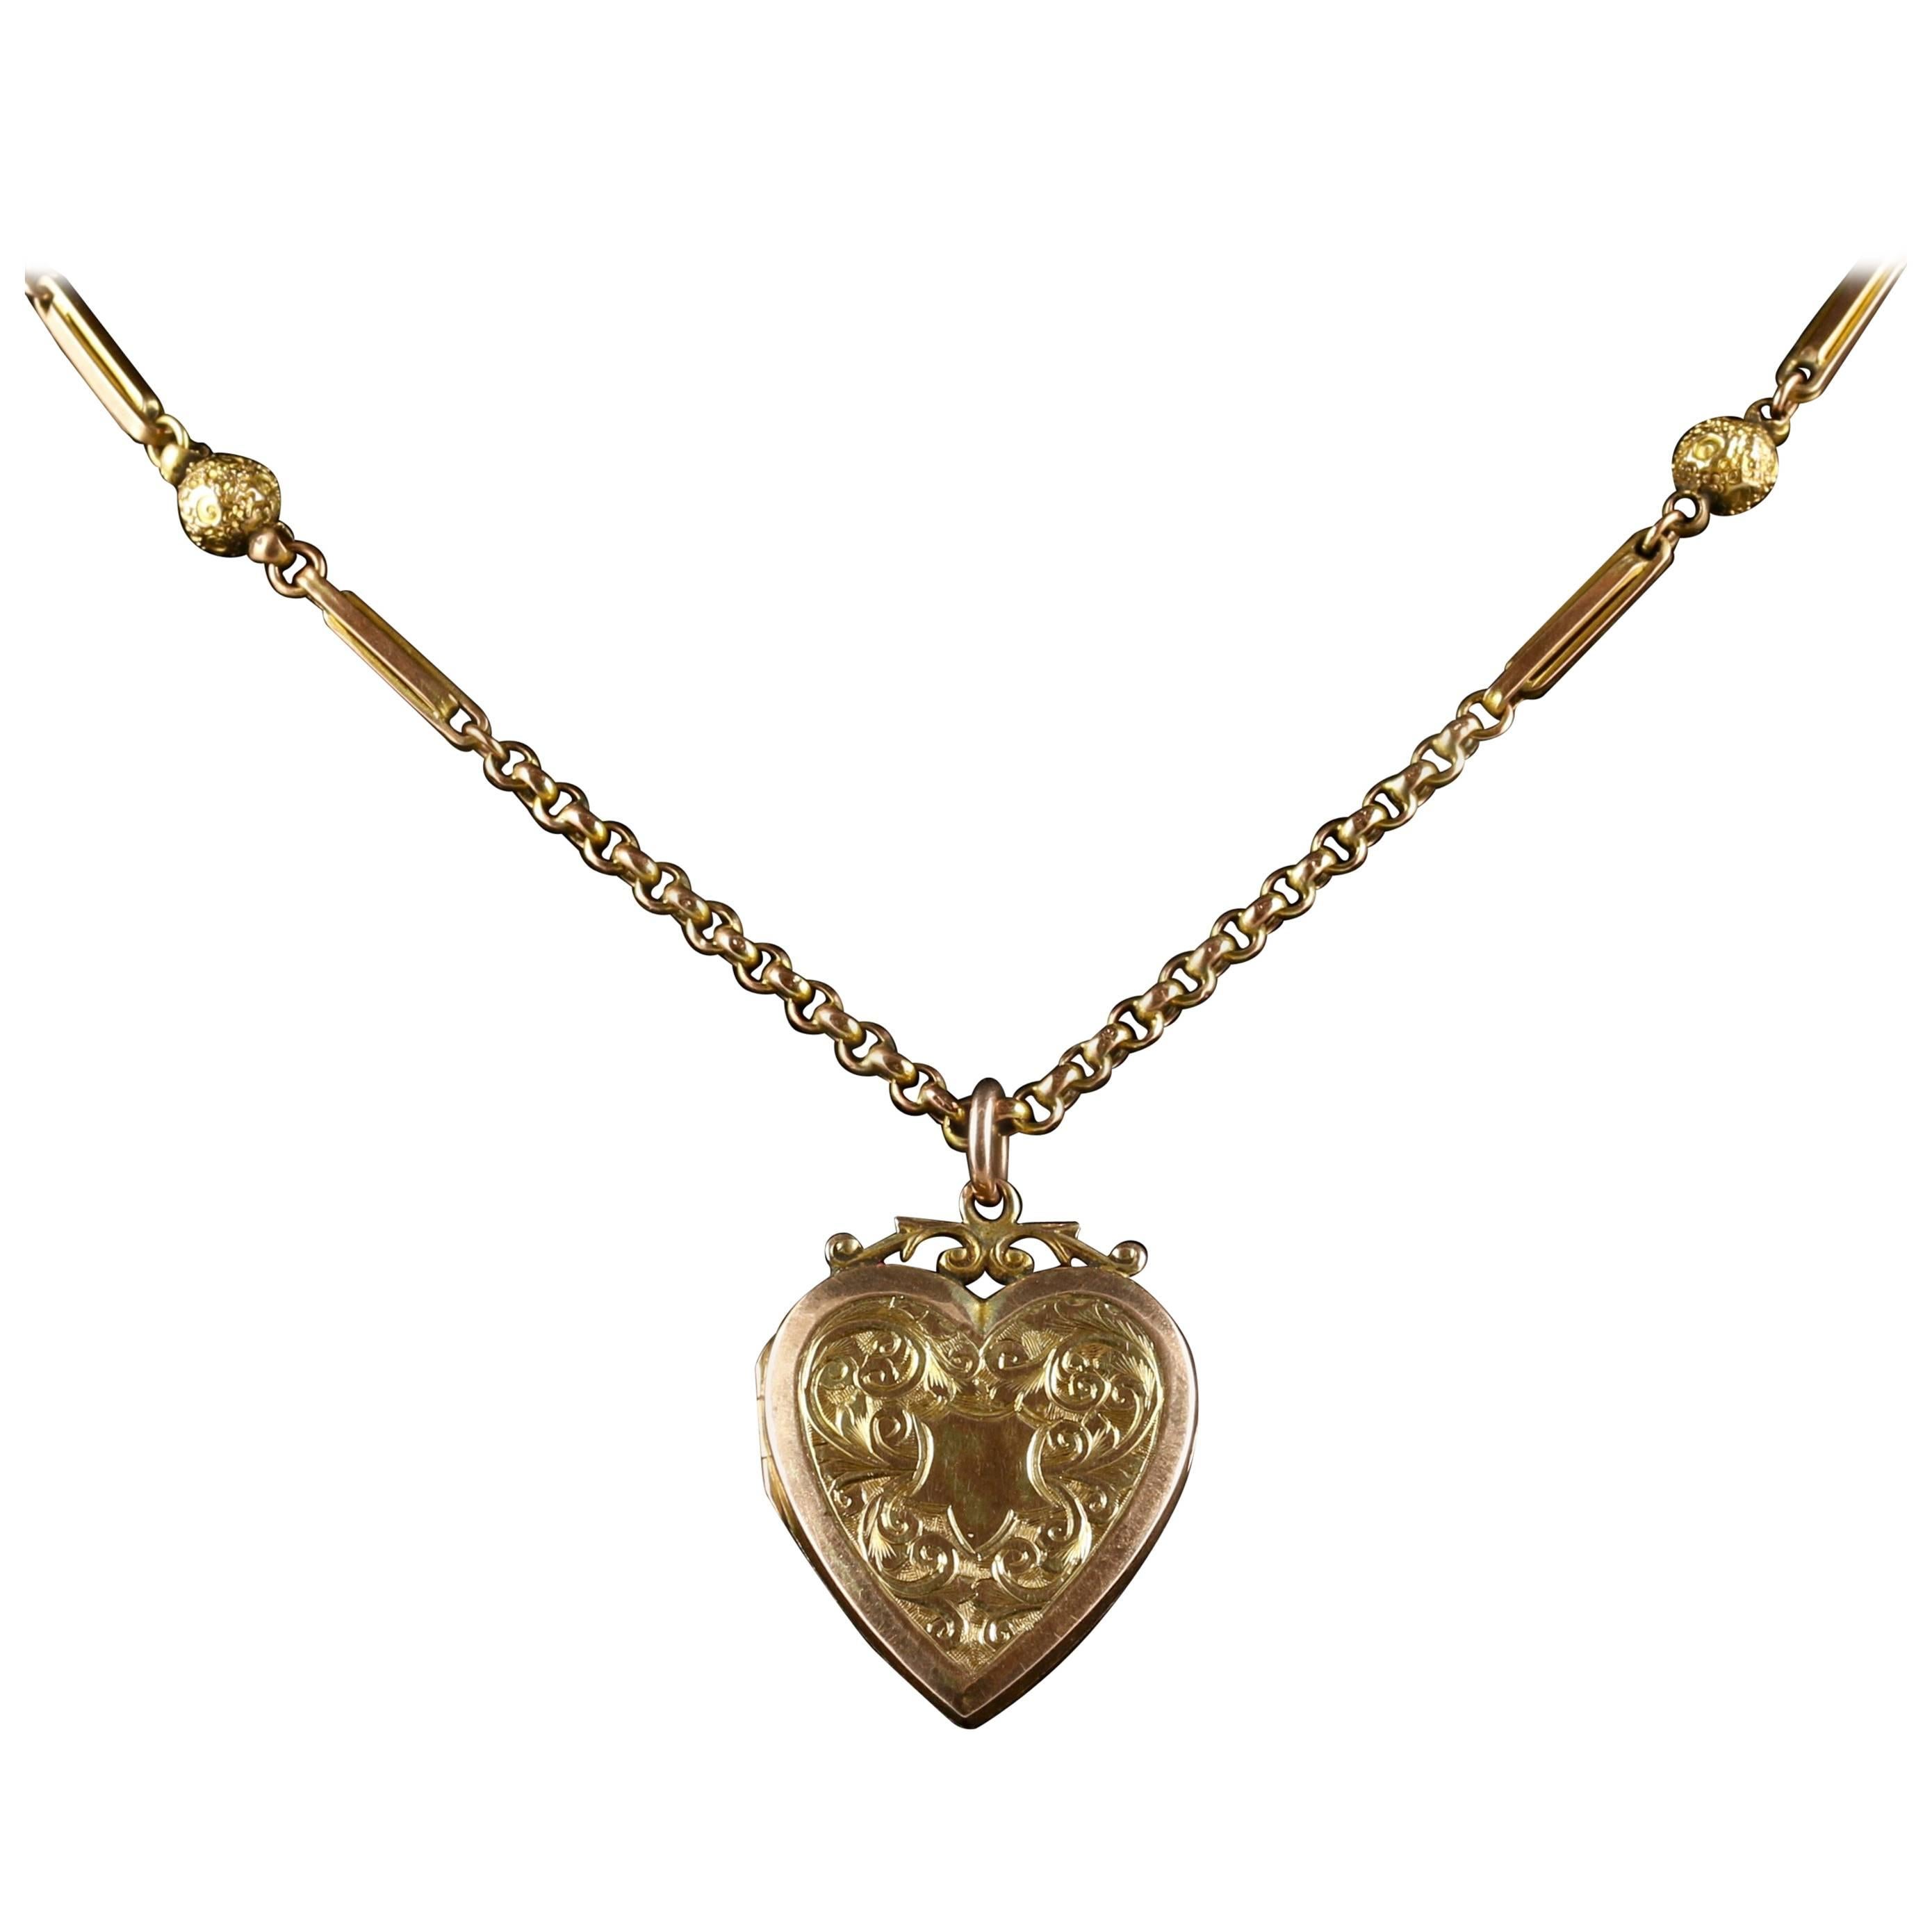 Antique Victorian Gold Heart Locket and Chain circa 1900